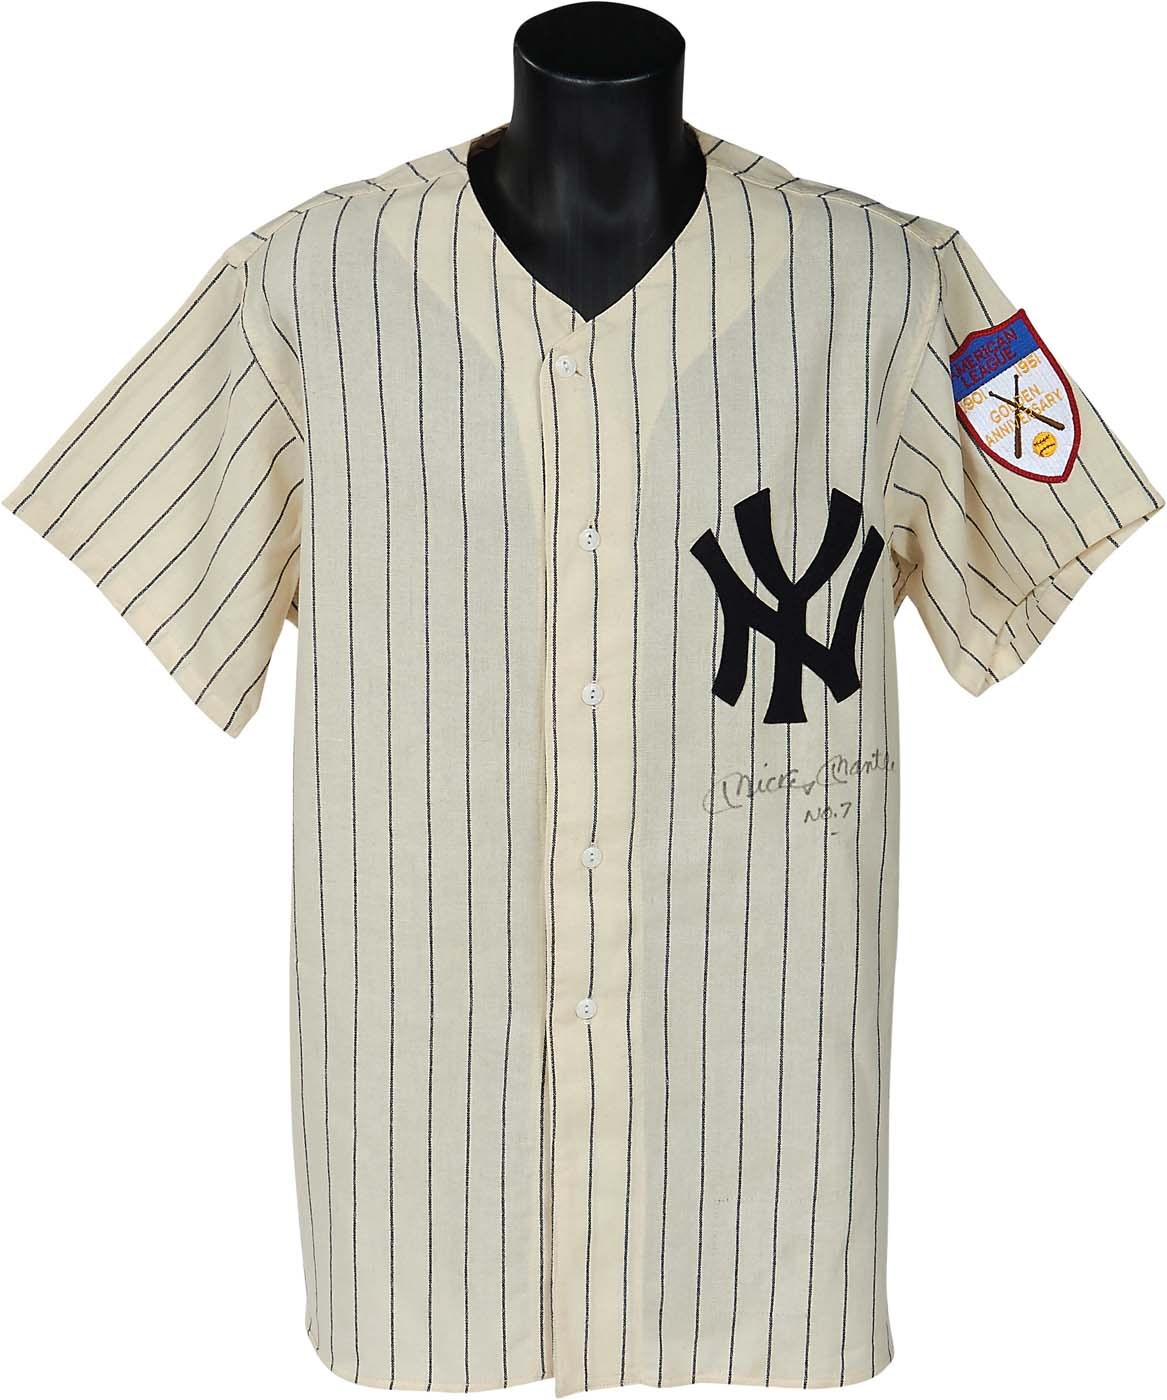 Mantle and Maris - Mickey Mantle "No.7" Signed Commemorative 1951 Yankees Jersey (PSA)